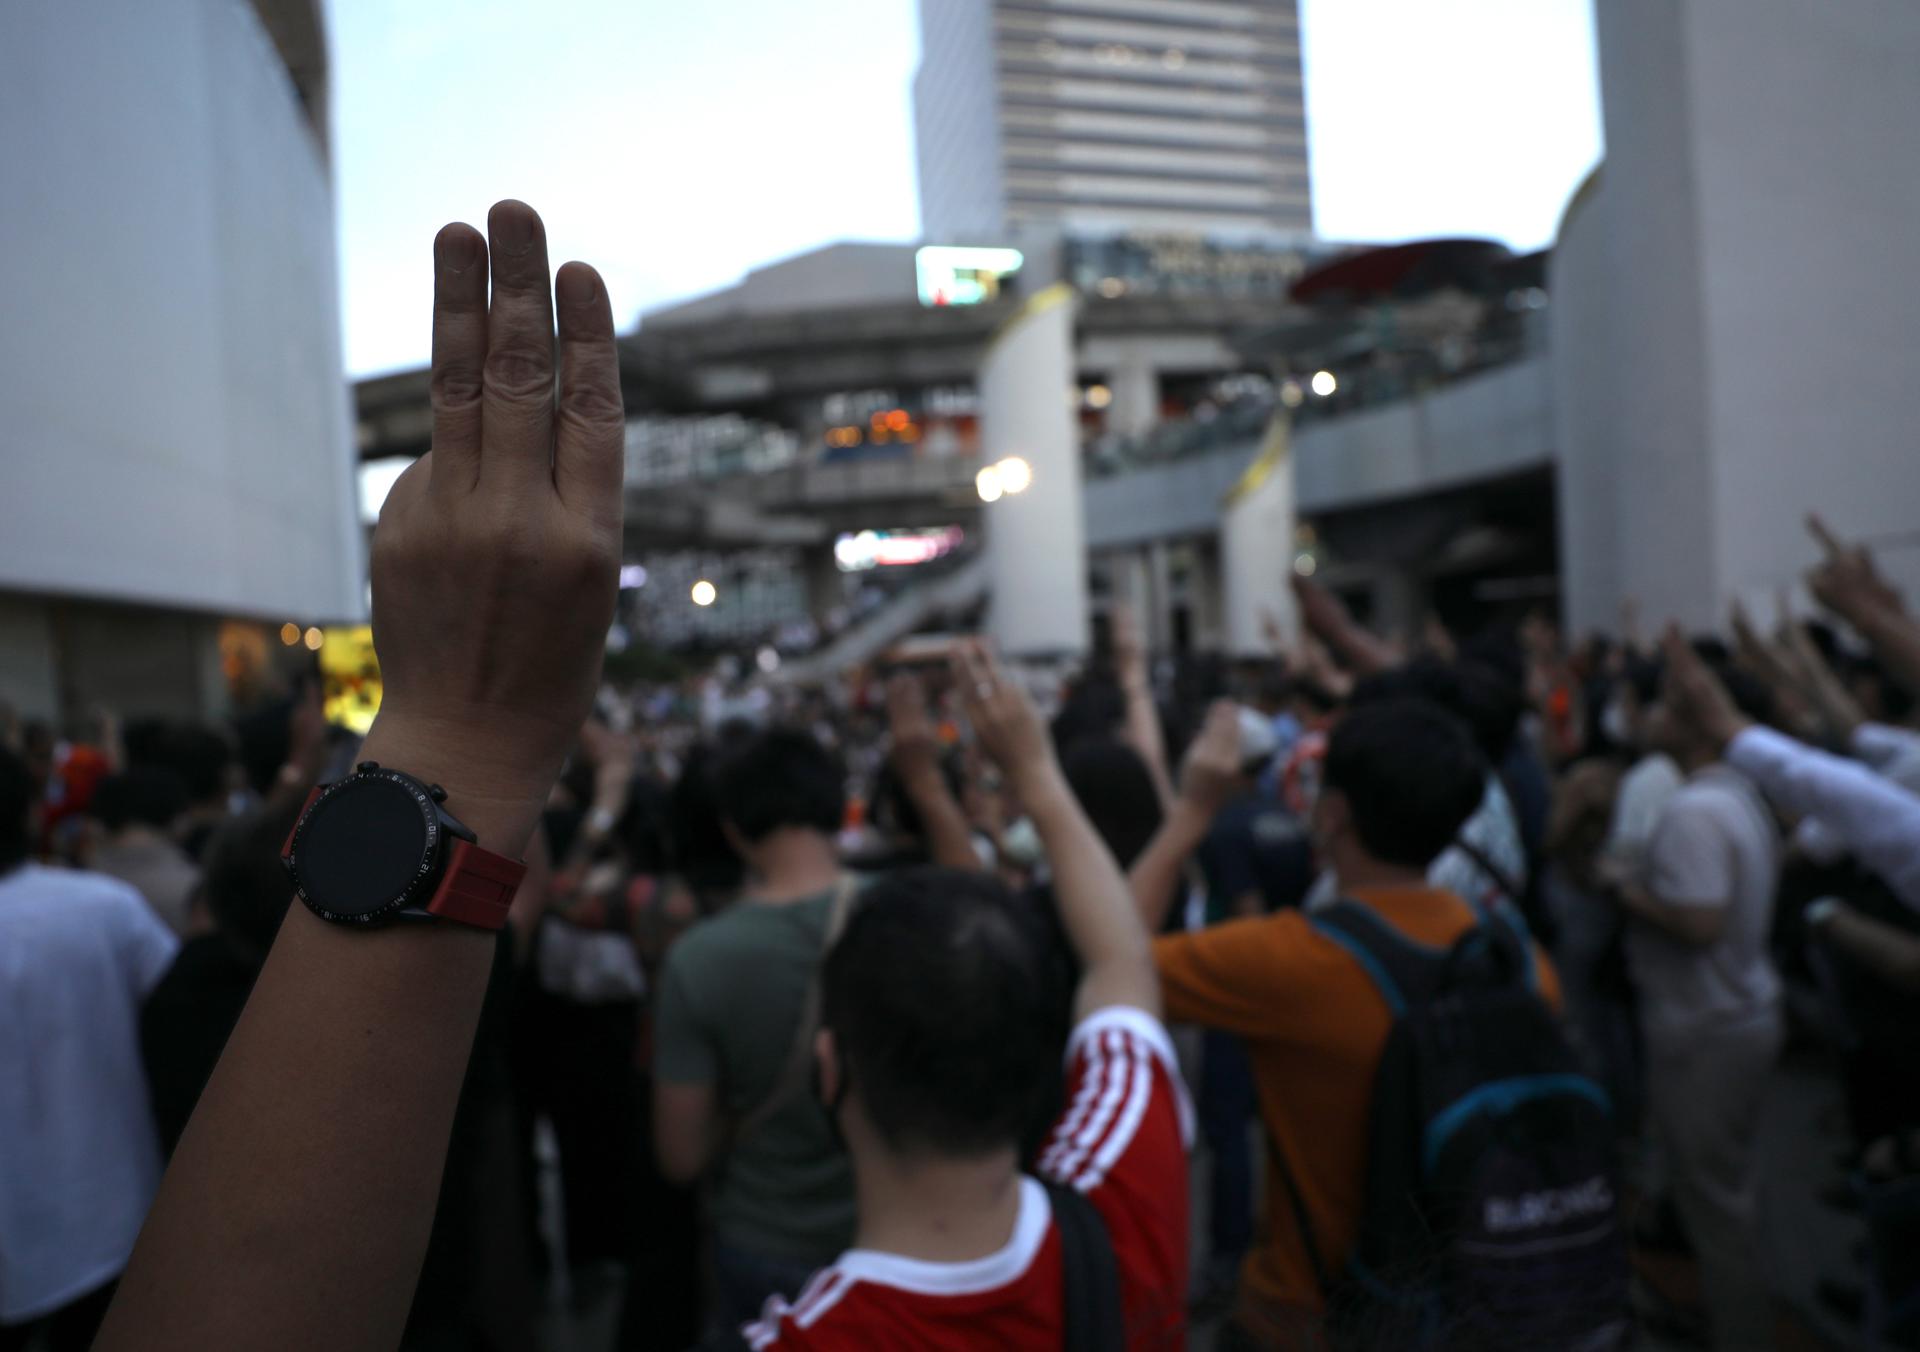 Supporters of Move Forward Party's leader and its prime ministerial candidate Pita Limjaroenrat flash the three-finger salute as they gather for a protest against the Thai Senate outside the Bangkok Art and Culture Centre in Bangkok, Thailand, 14 July 2023. Hundreds of people gathered to protest against the Senate after the election front-runner Pita Limjaroenrat failed to secure a crucial vote to become Thailand's next prime minister in a joint session of the House of Representatives and Senate on 13 July. A majority of senators opposed voting for him. (Protestas, Tailandia) EFE/EPA/NARONG SANGNAK
